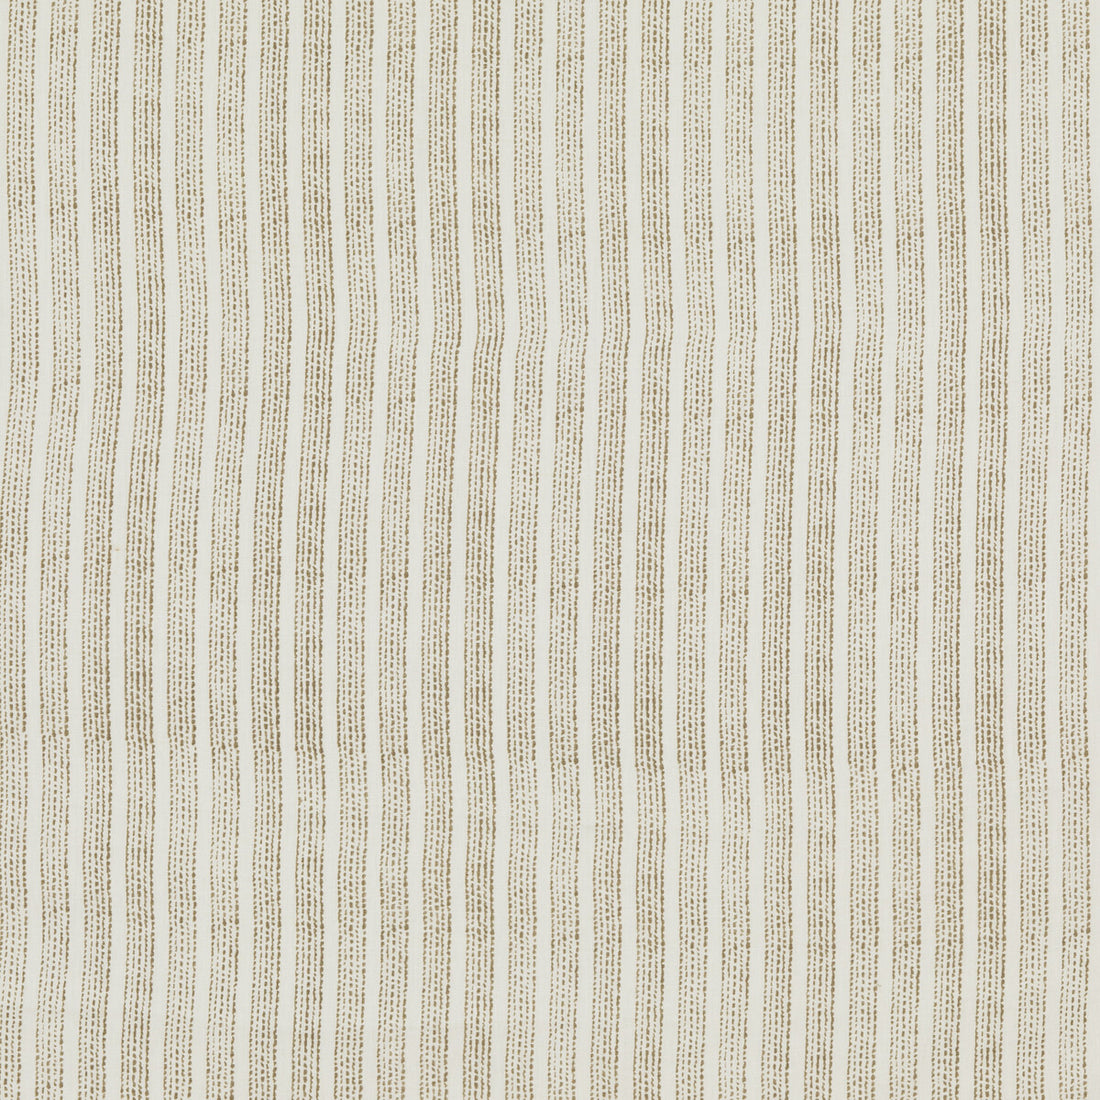 Mimar fabric in bronze color - pattern ED75034.5.0 - by Threads in the Moro collection